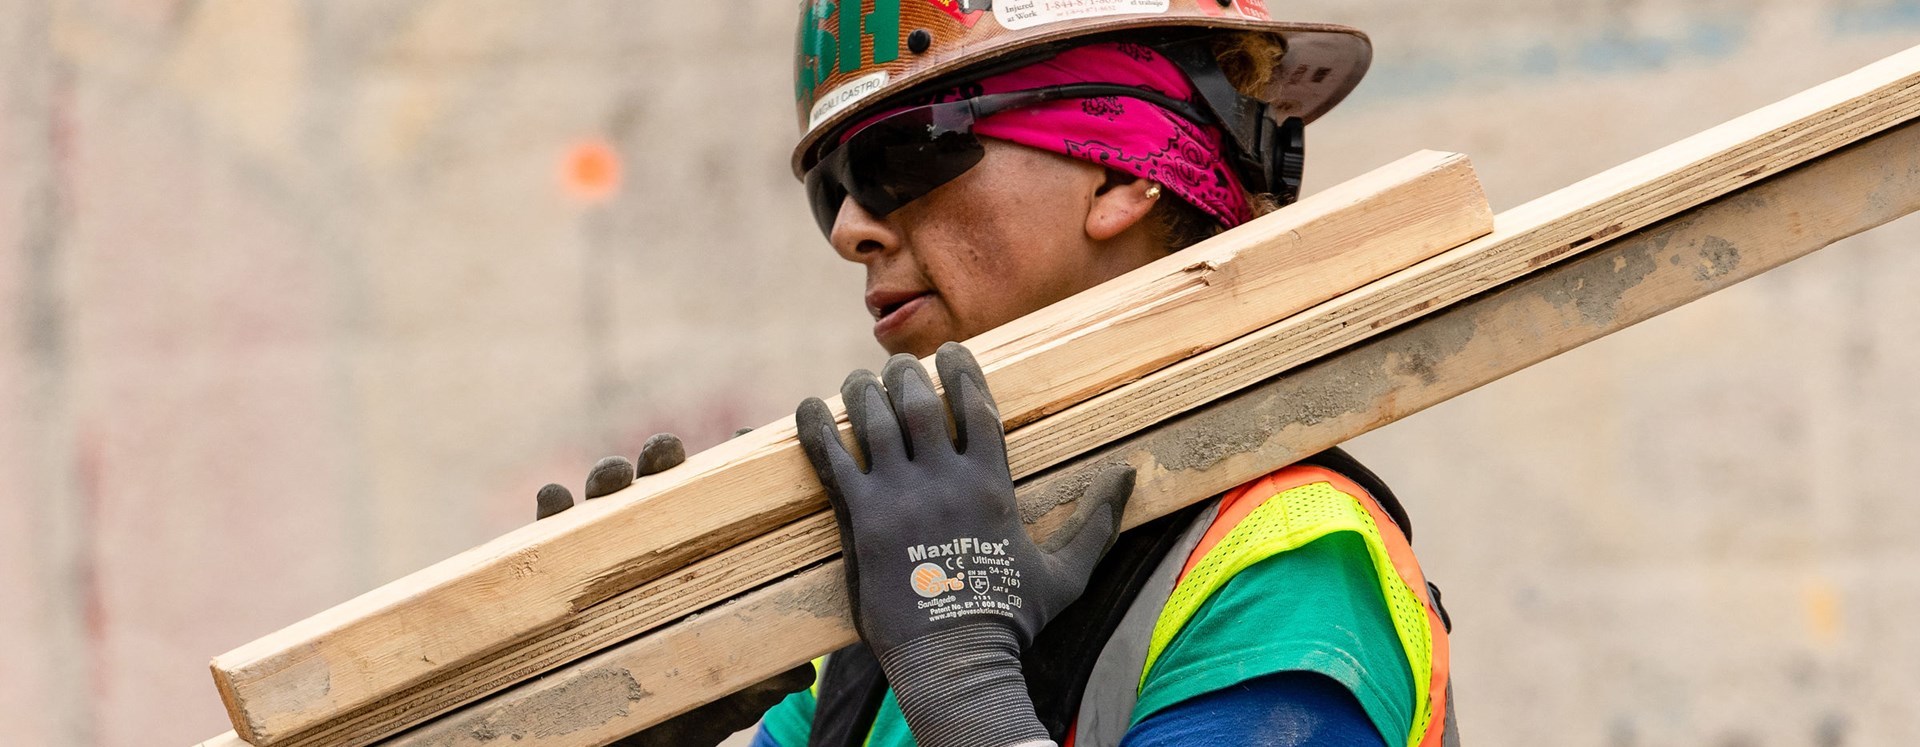 A construction worker carrying lumber.